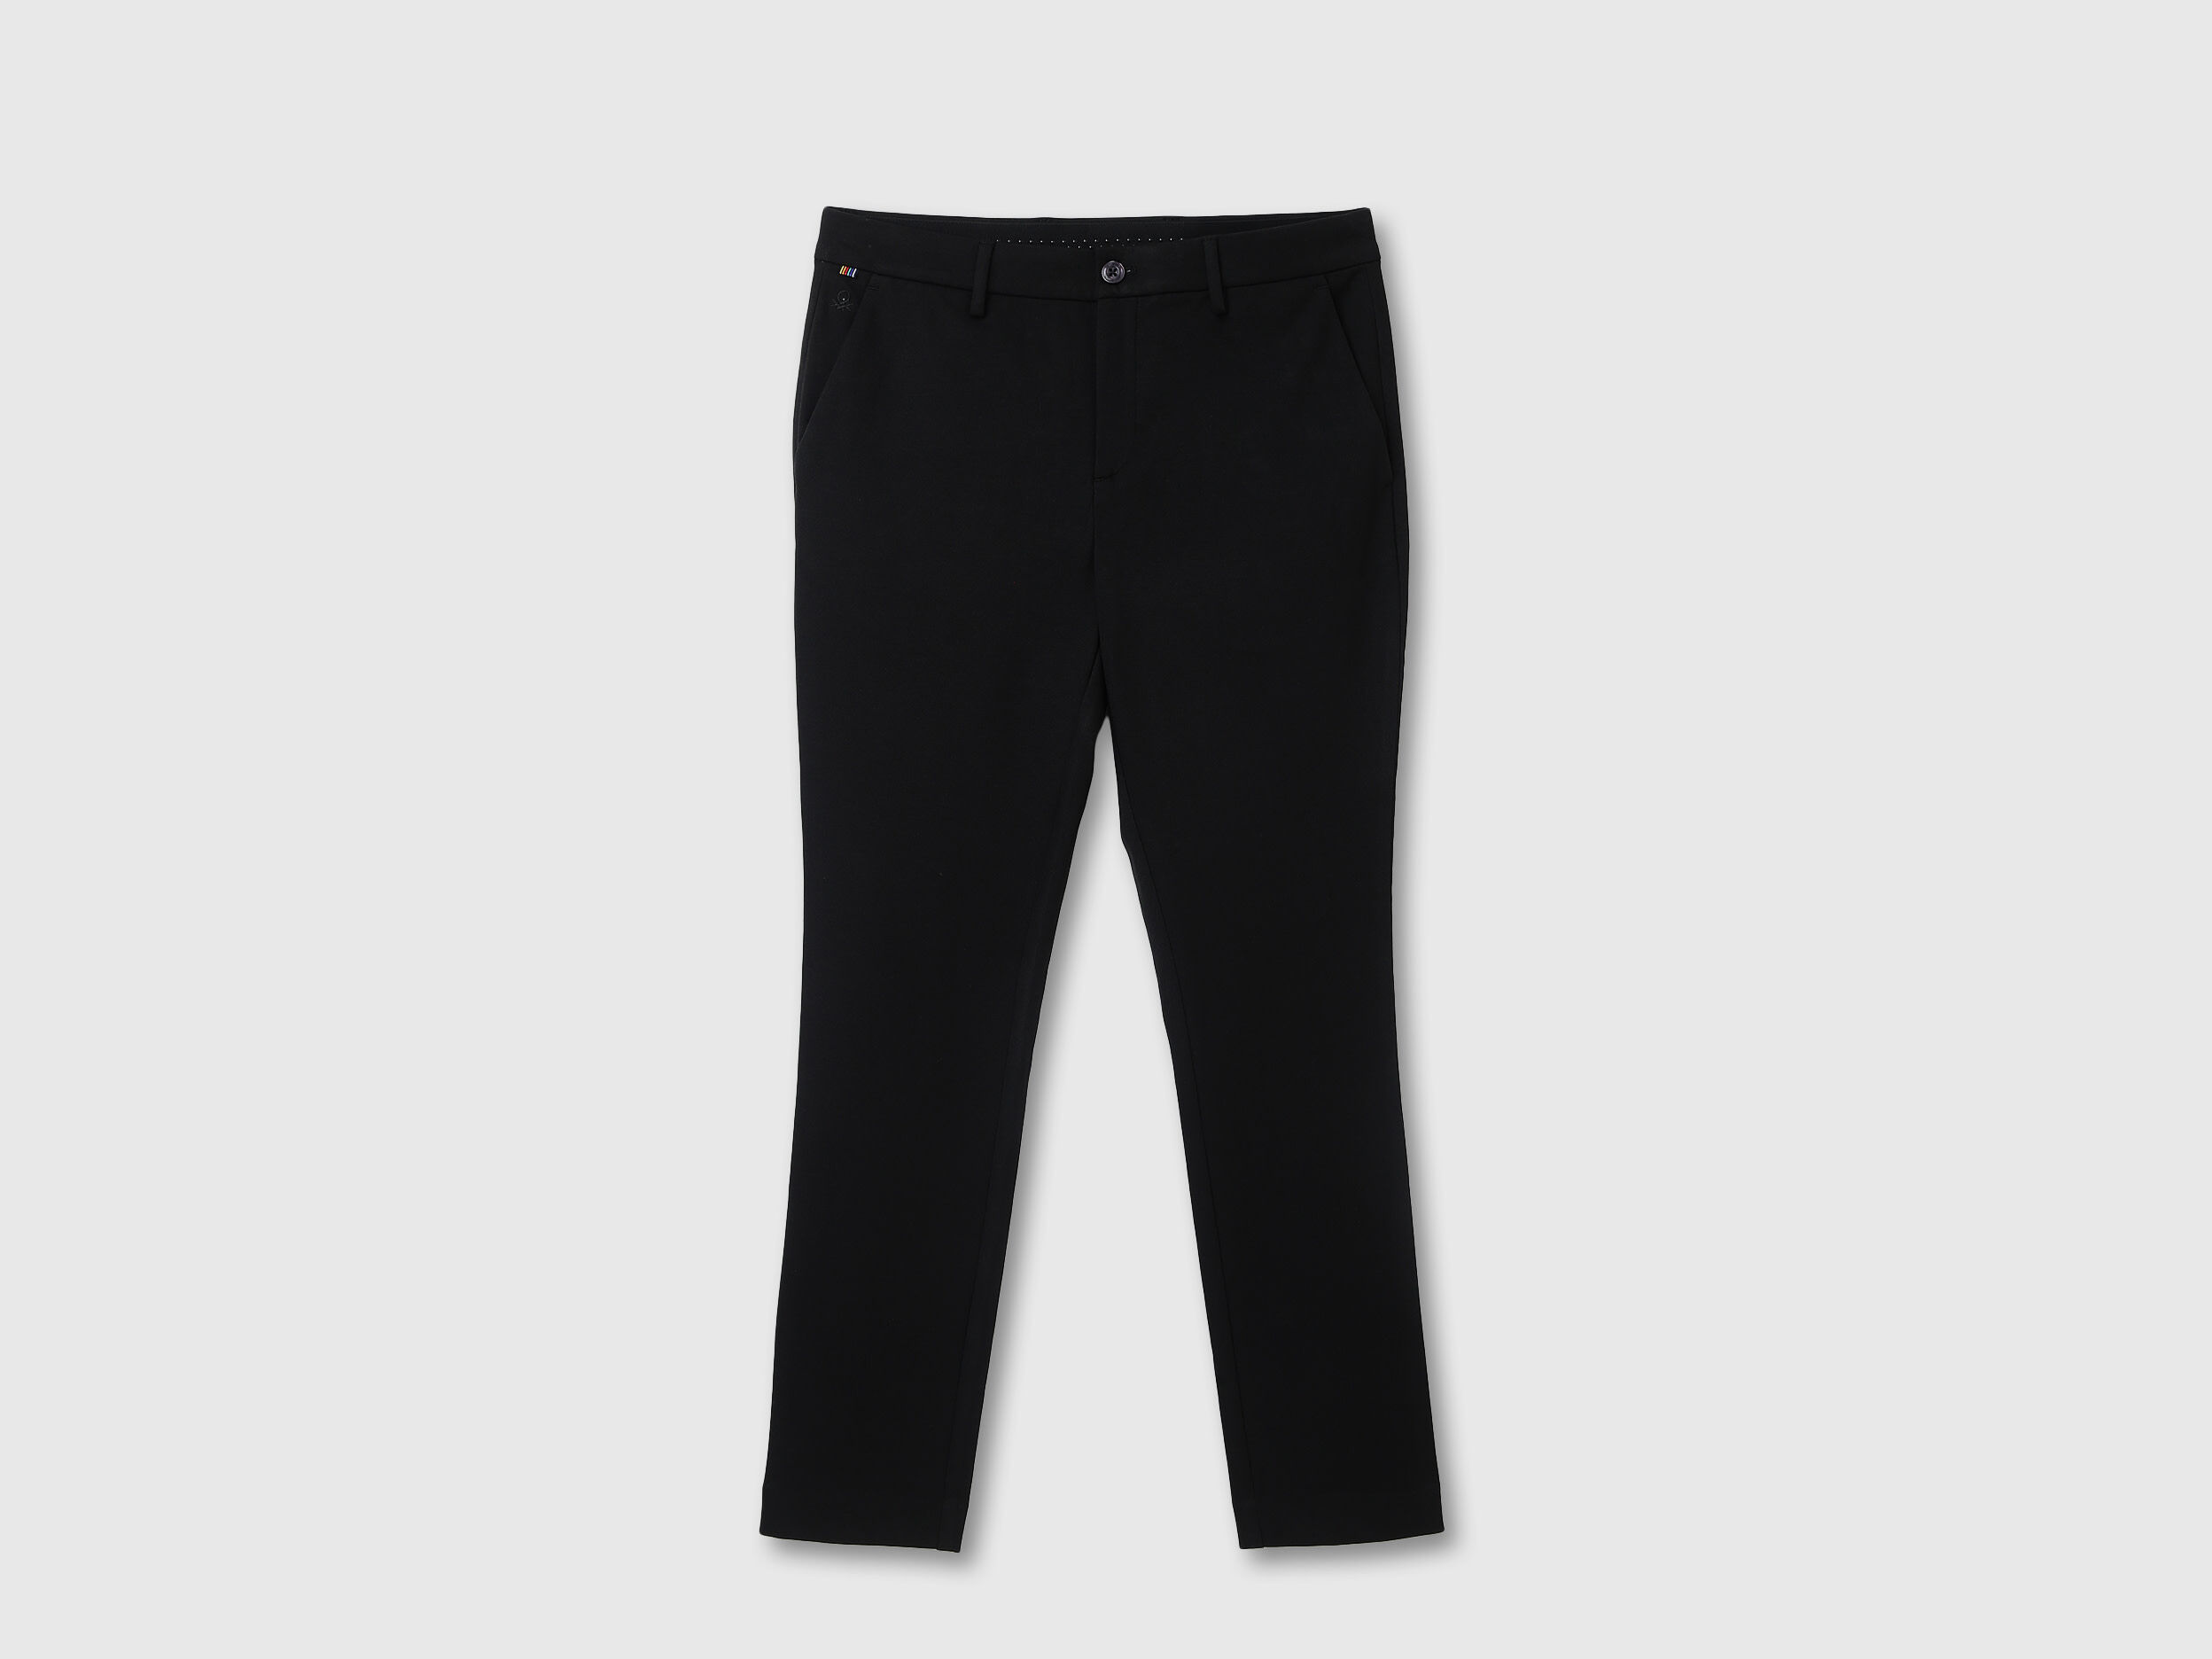 United colors of benetton casual trousers  Buy United colors of benetton  casual trousers online in India